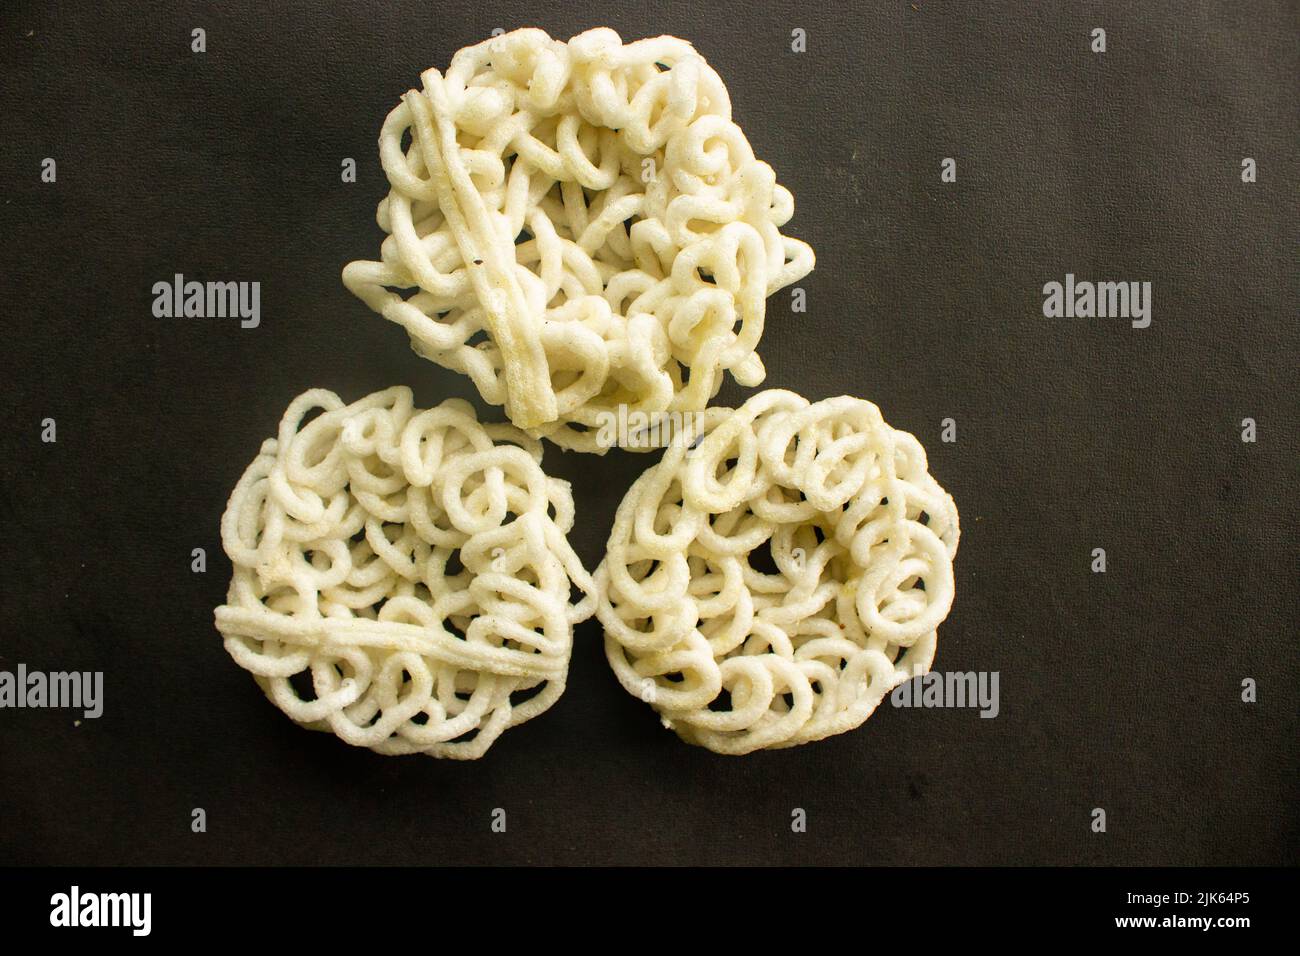 kerupuk or krupuk or crackers isolated on black background. kerupuk is snacks made from tapioca flour dough mixed with flavorings such as shrimp or fi Stock Photo